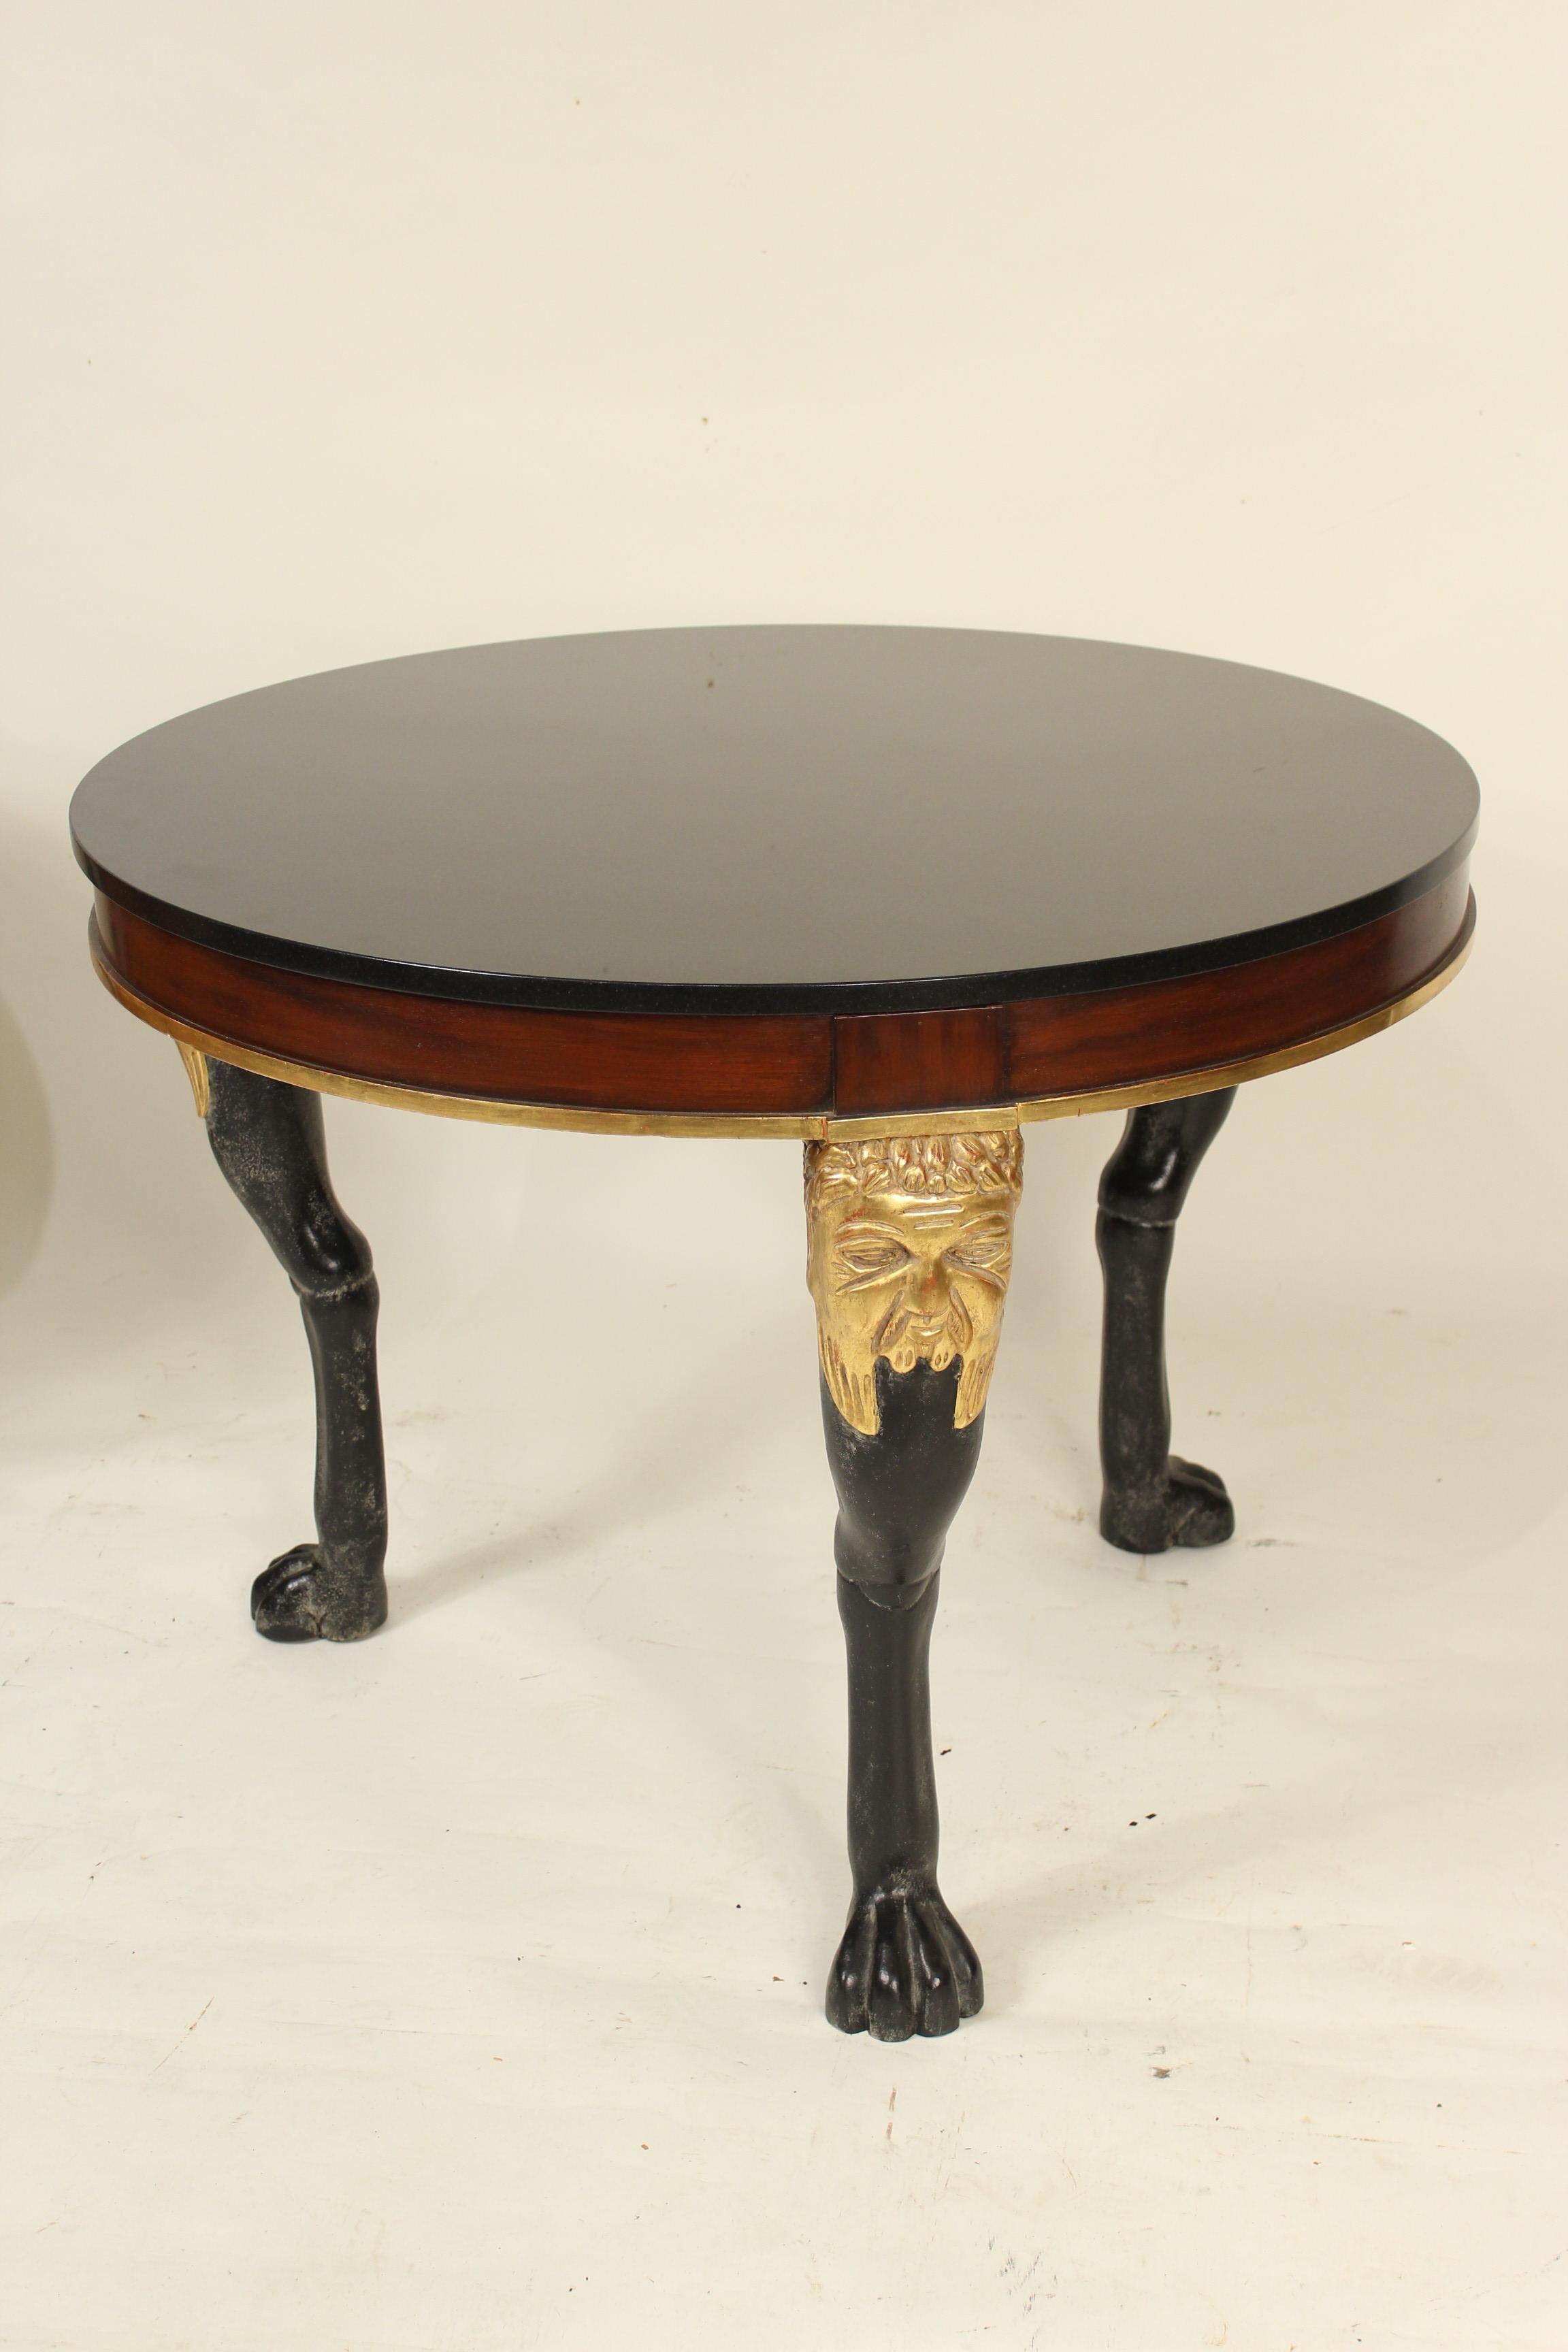 Pair of large scale neoclassical style gold leaf, mahogany and painted occasional tables with marble tops, late 20th century. Inscription on the bottom of one table indicates an association with Quatrain, in Los Angeles, either made by or used in a